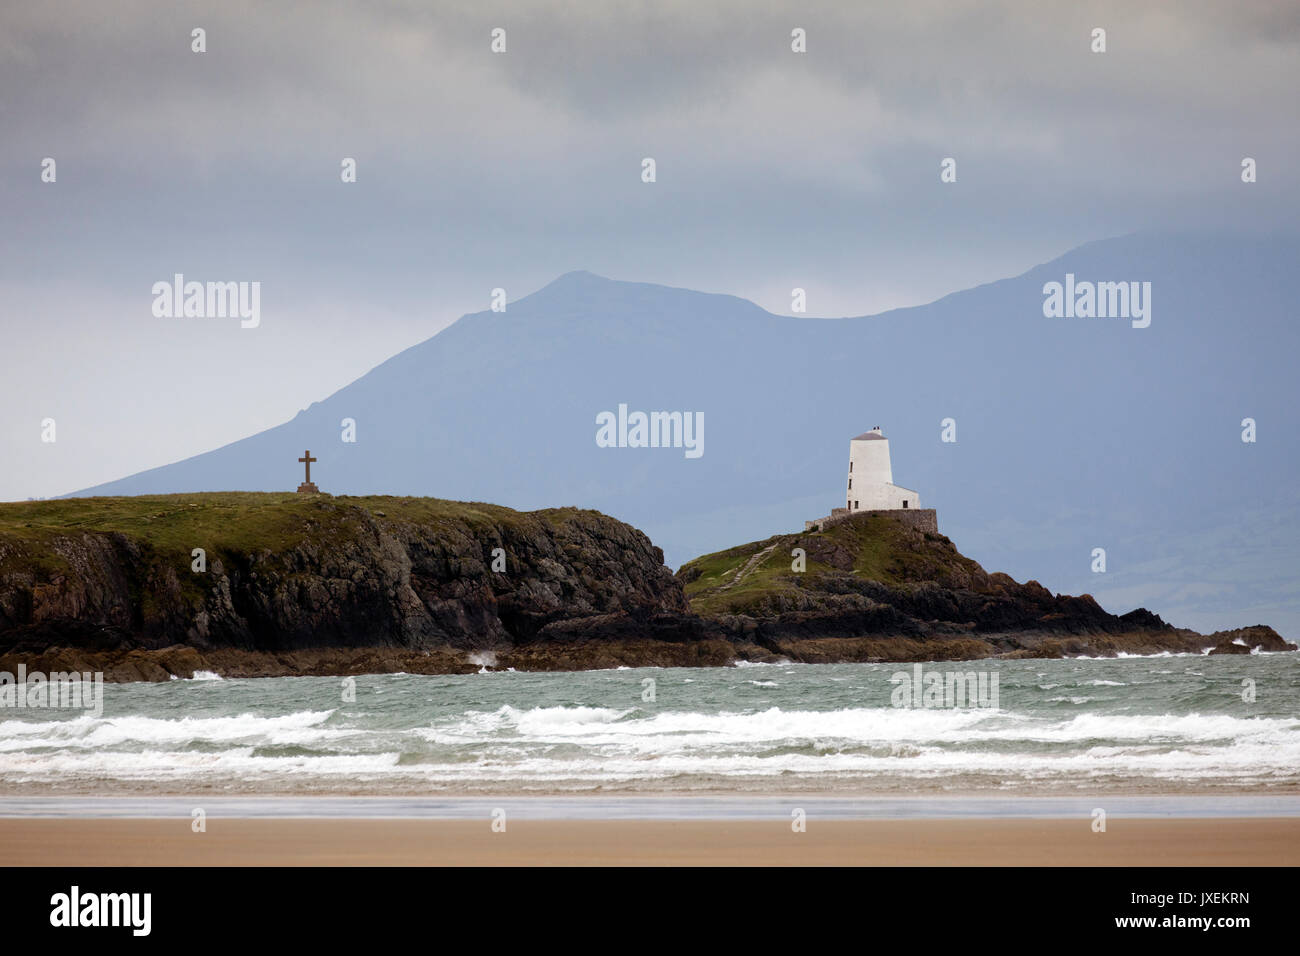 Windy summer weather over Ynys Llanddwyn Island or Llandddwyn Island with Twr Mawr lighthouse and Drynwen Cross visible against the backdrop of mountains, Newborough, Anglesey, Wales, UK Stock Photo